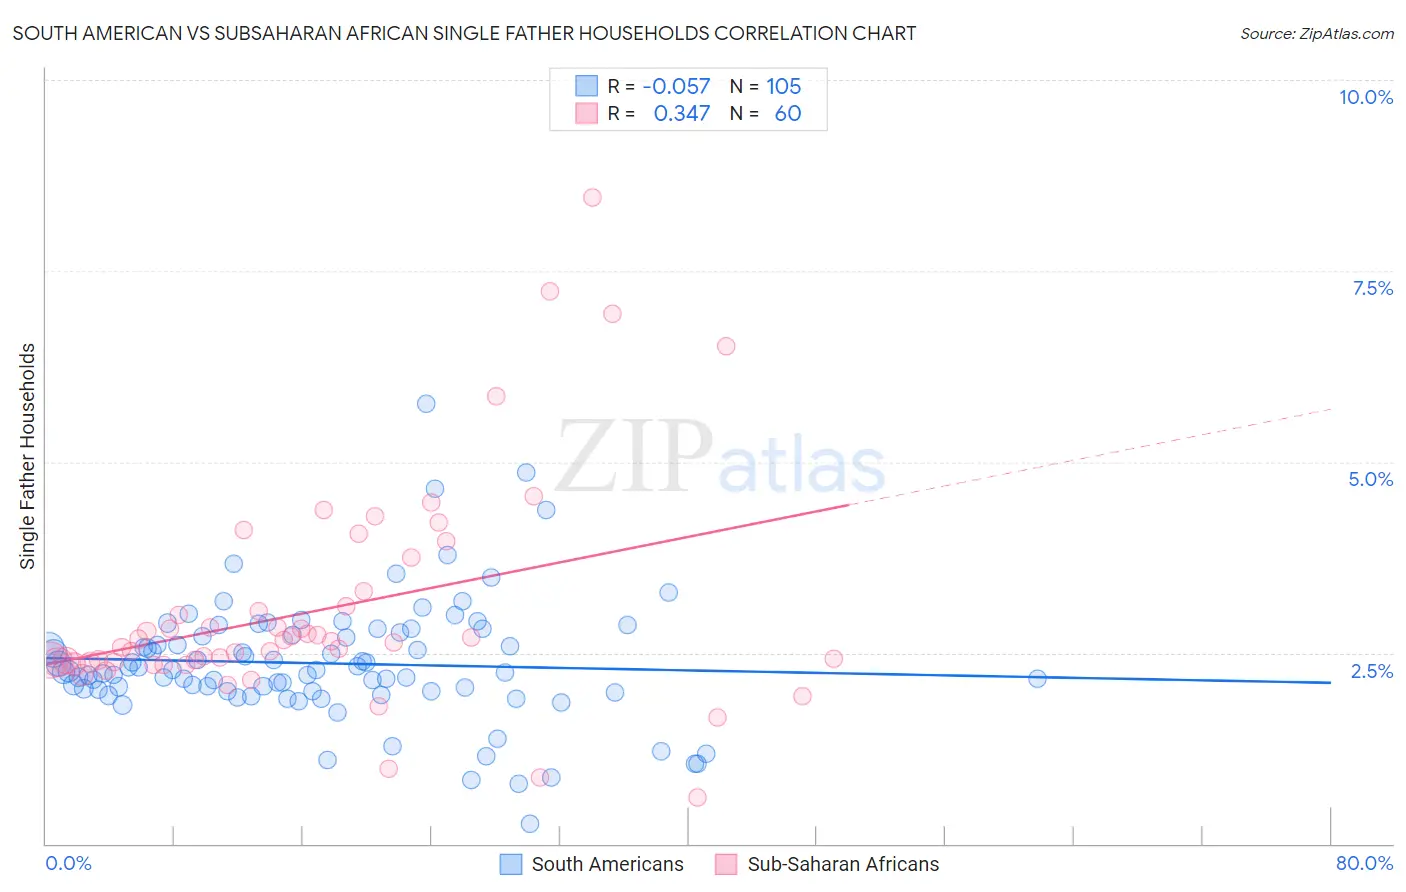 South American vs Subsaharan African Single Father Households